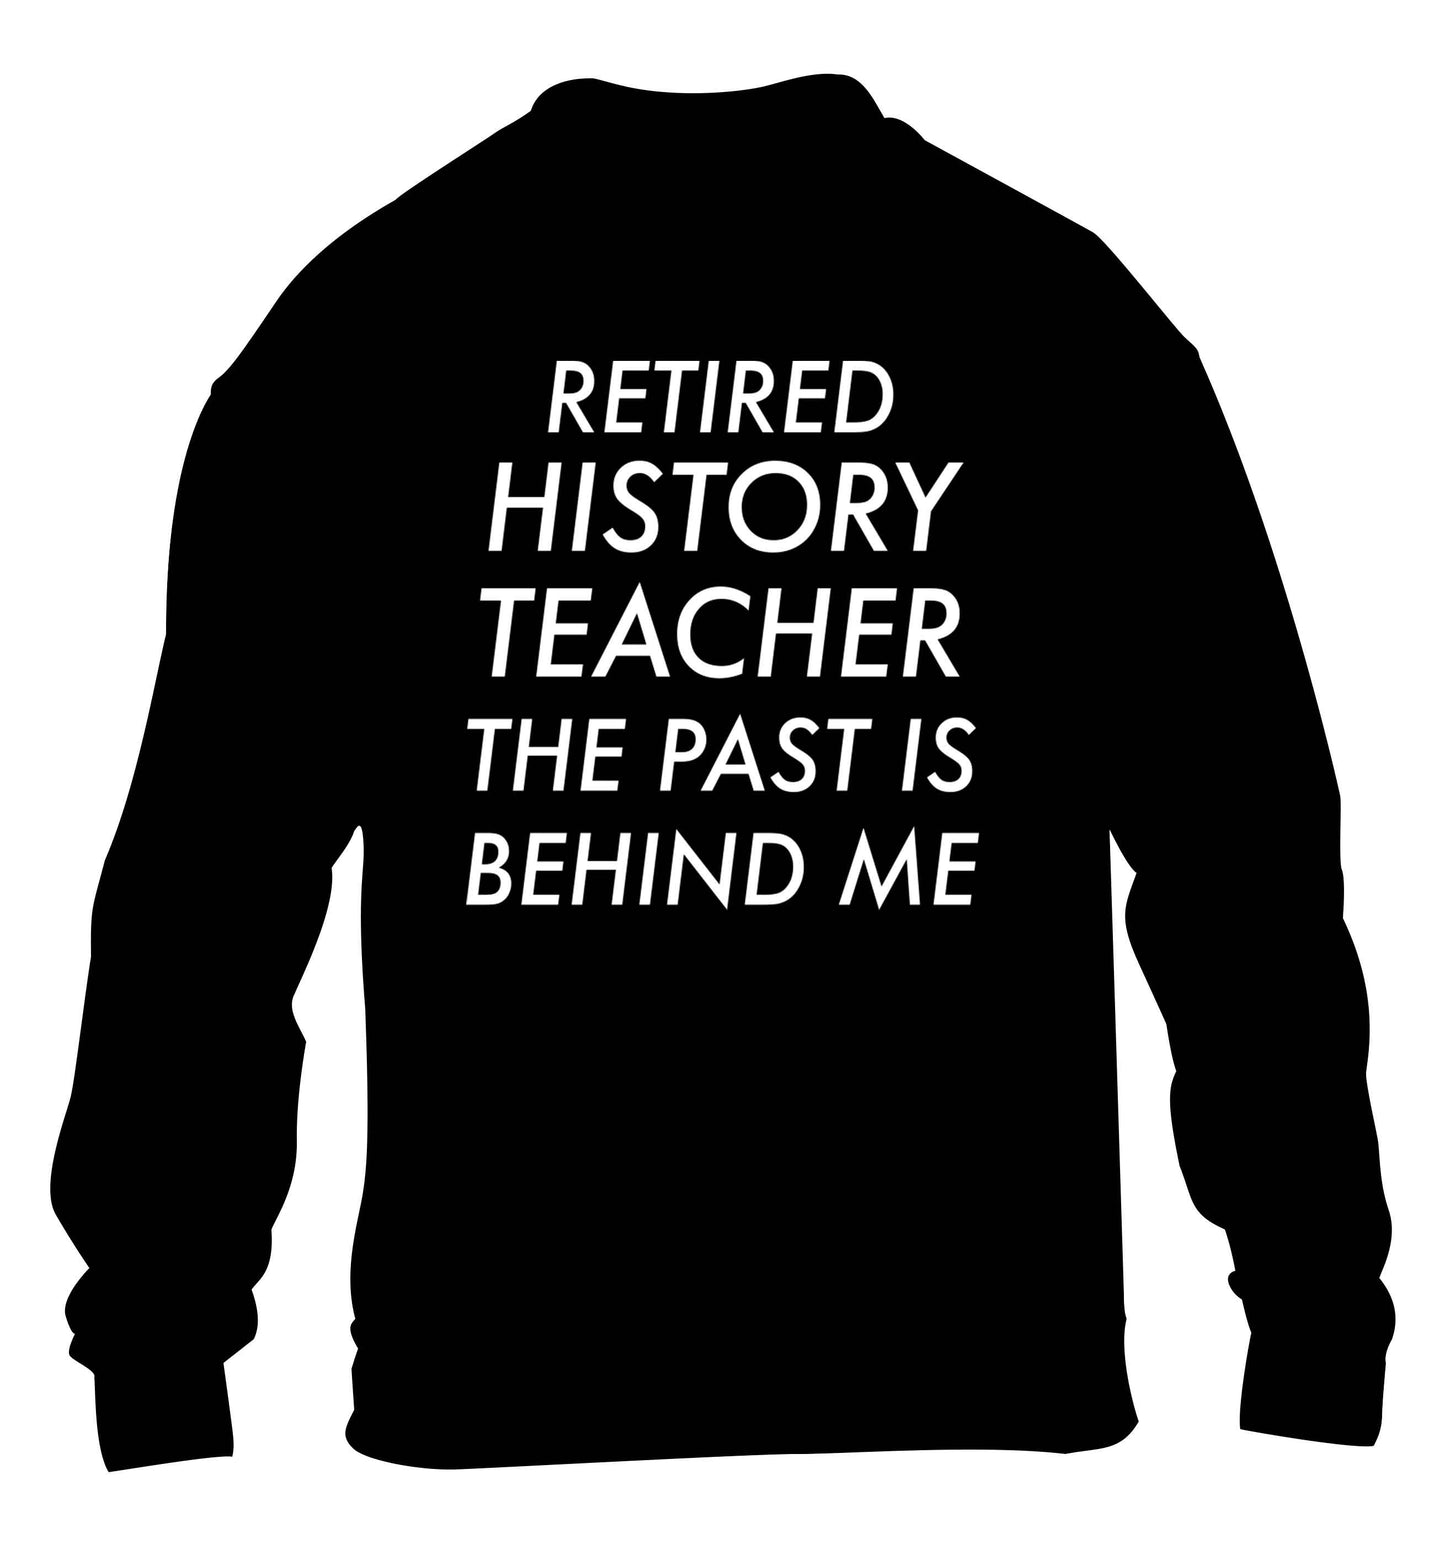 Retired history teacher the past is behind me children's black sweater 12-13 Years